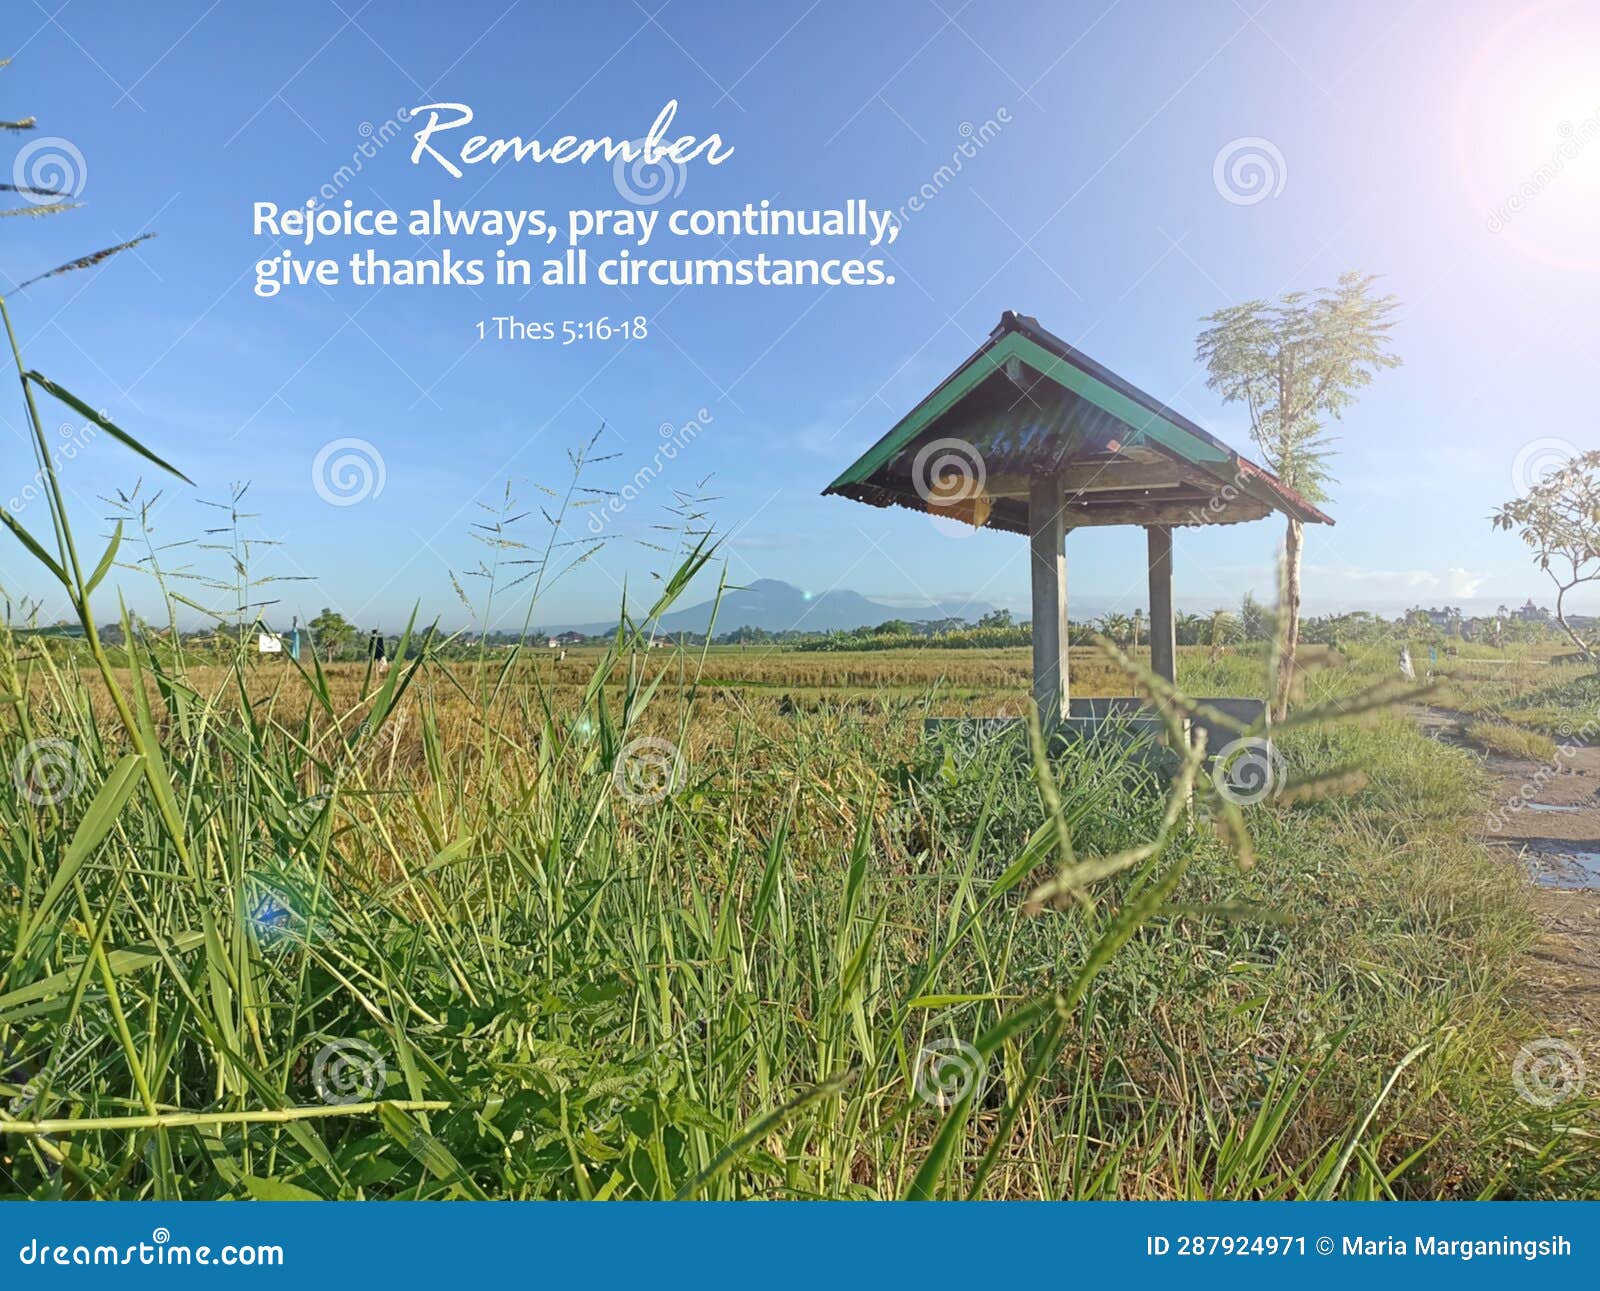 bible verse quote - remember rejoice always, pray continually, give thanks in all circumstances. 1 thessalonian 5:16-18ural